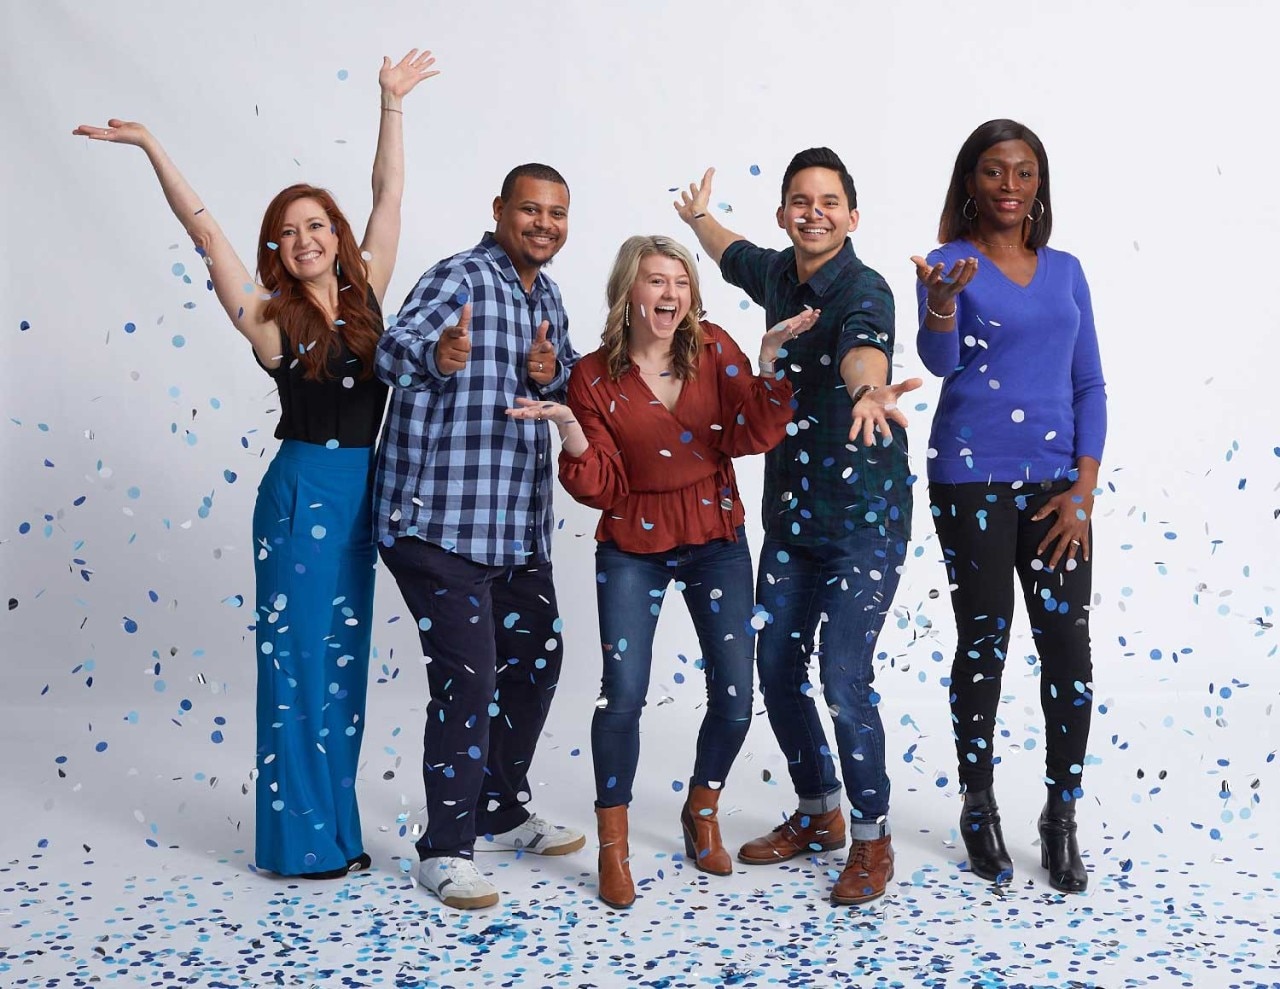 Five SAS employees celebrating with confetti shower